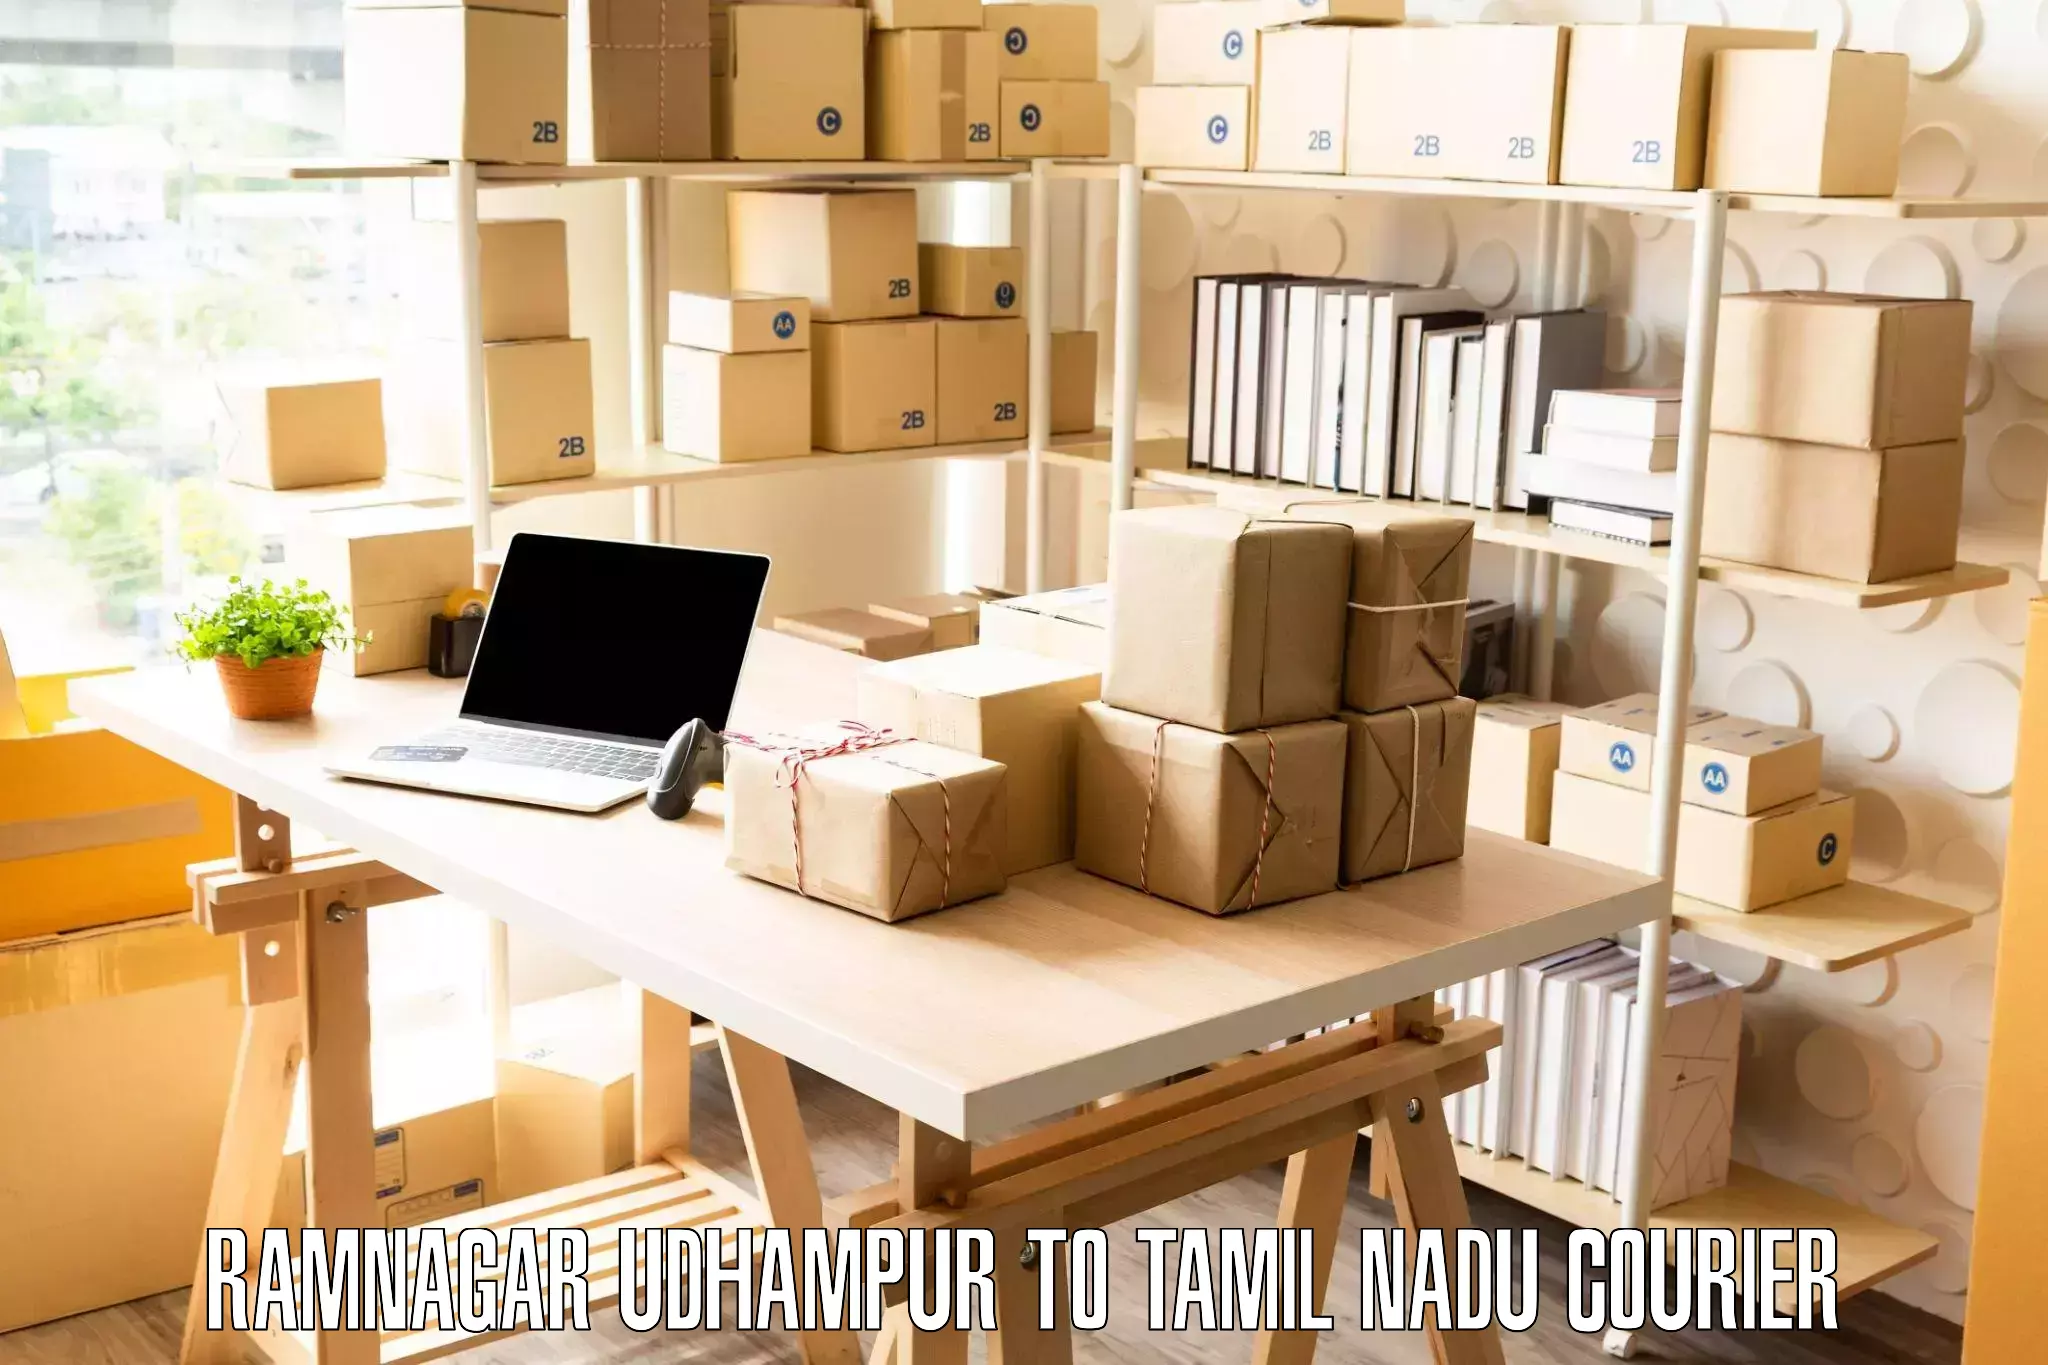 Full-service movers Ramnagar Udhampur to Mylapore